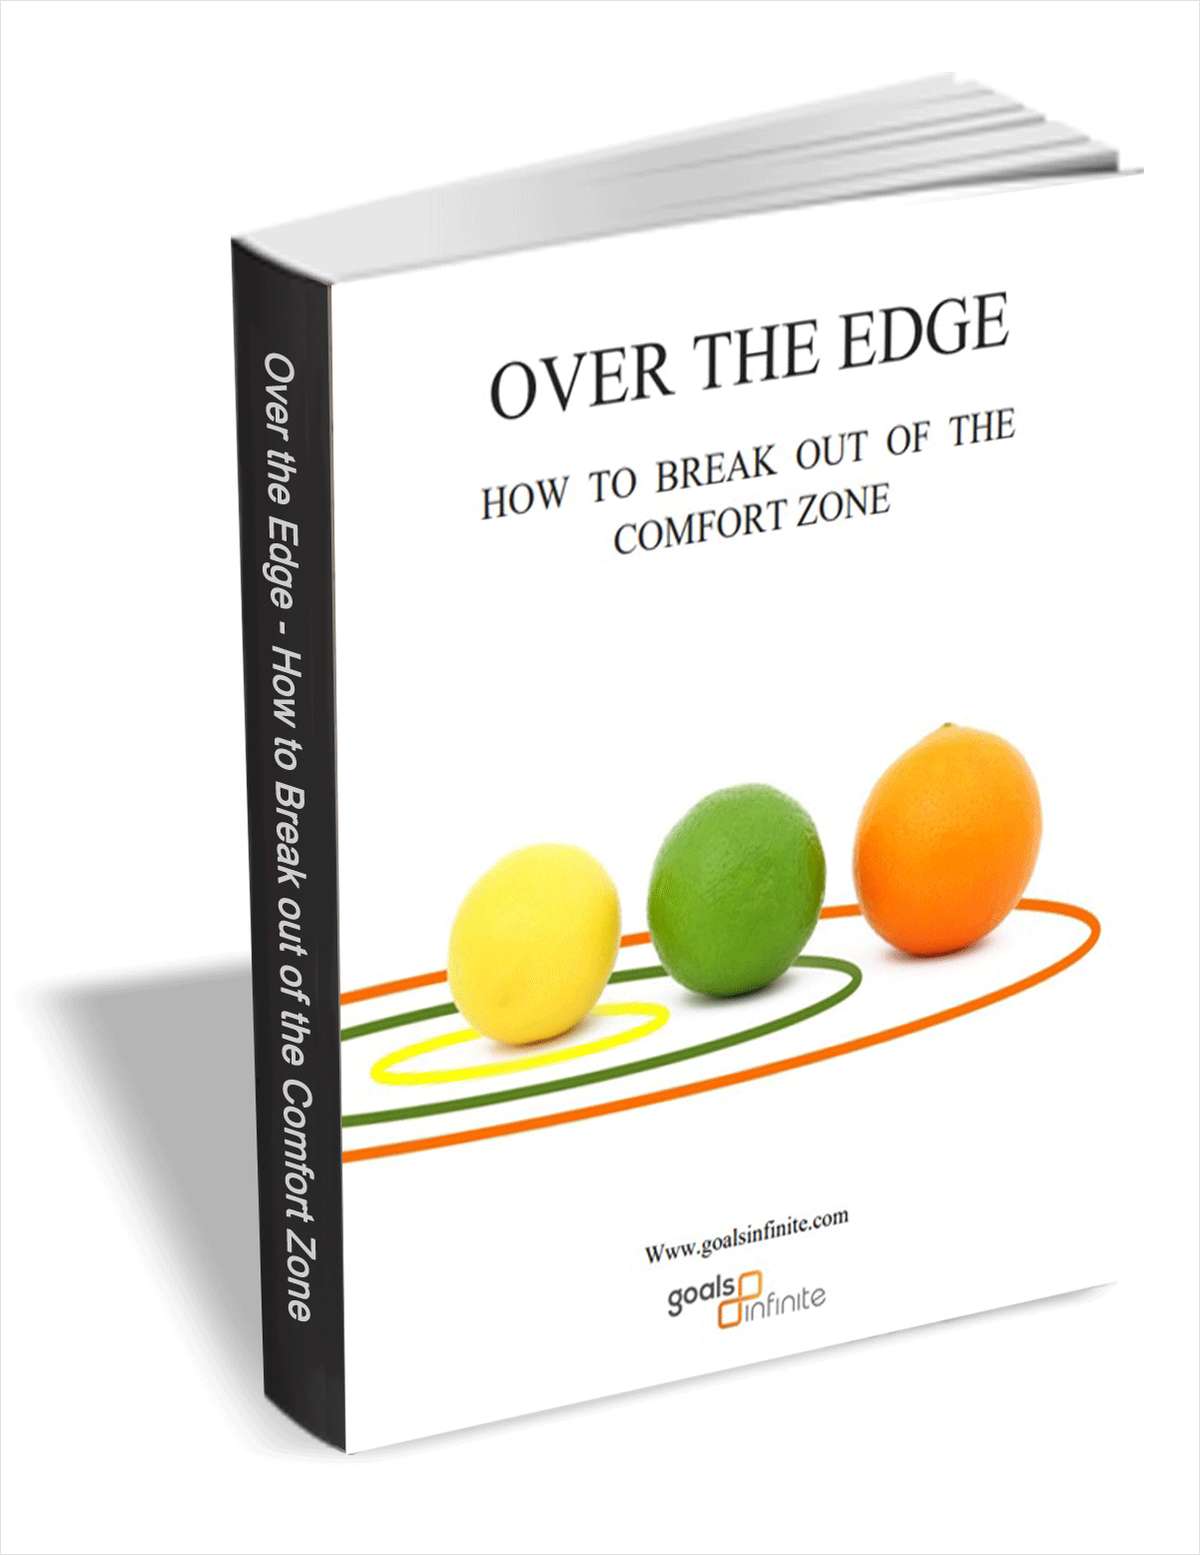 Over the Edge - How to Break Out of the Comfort Zone